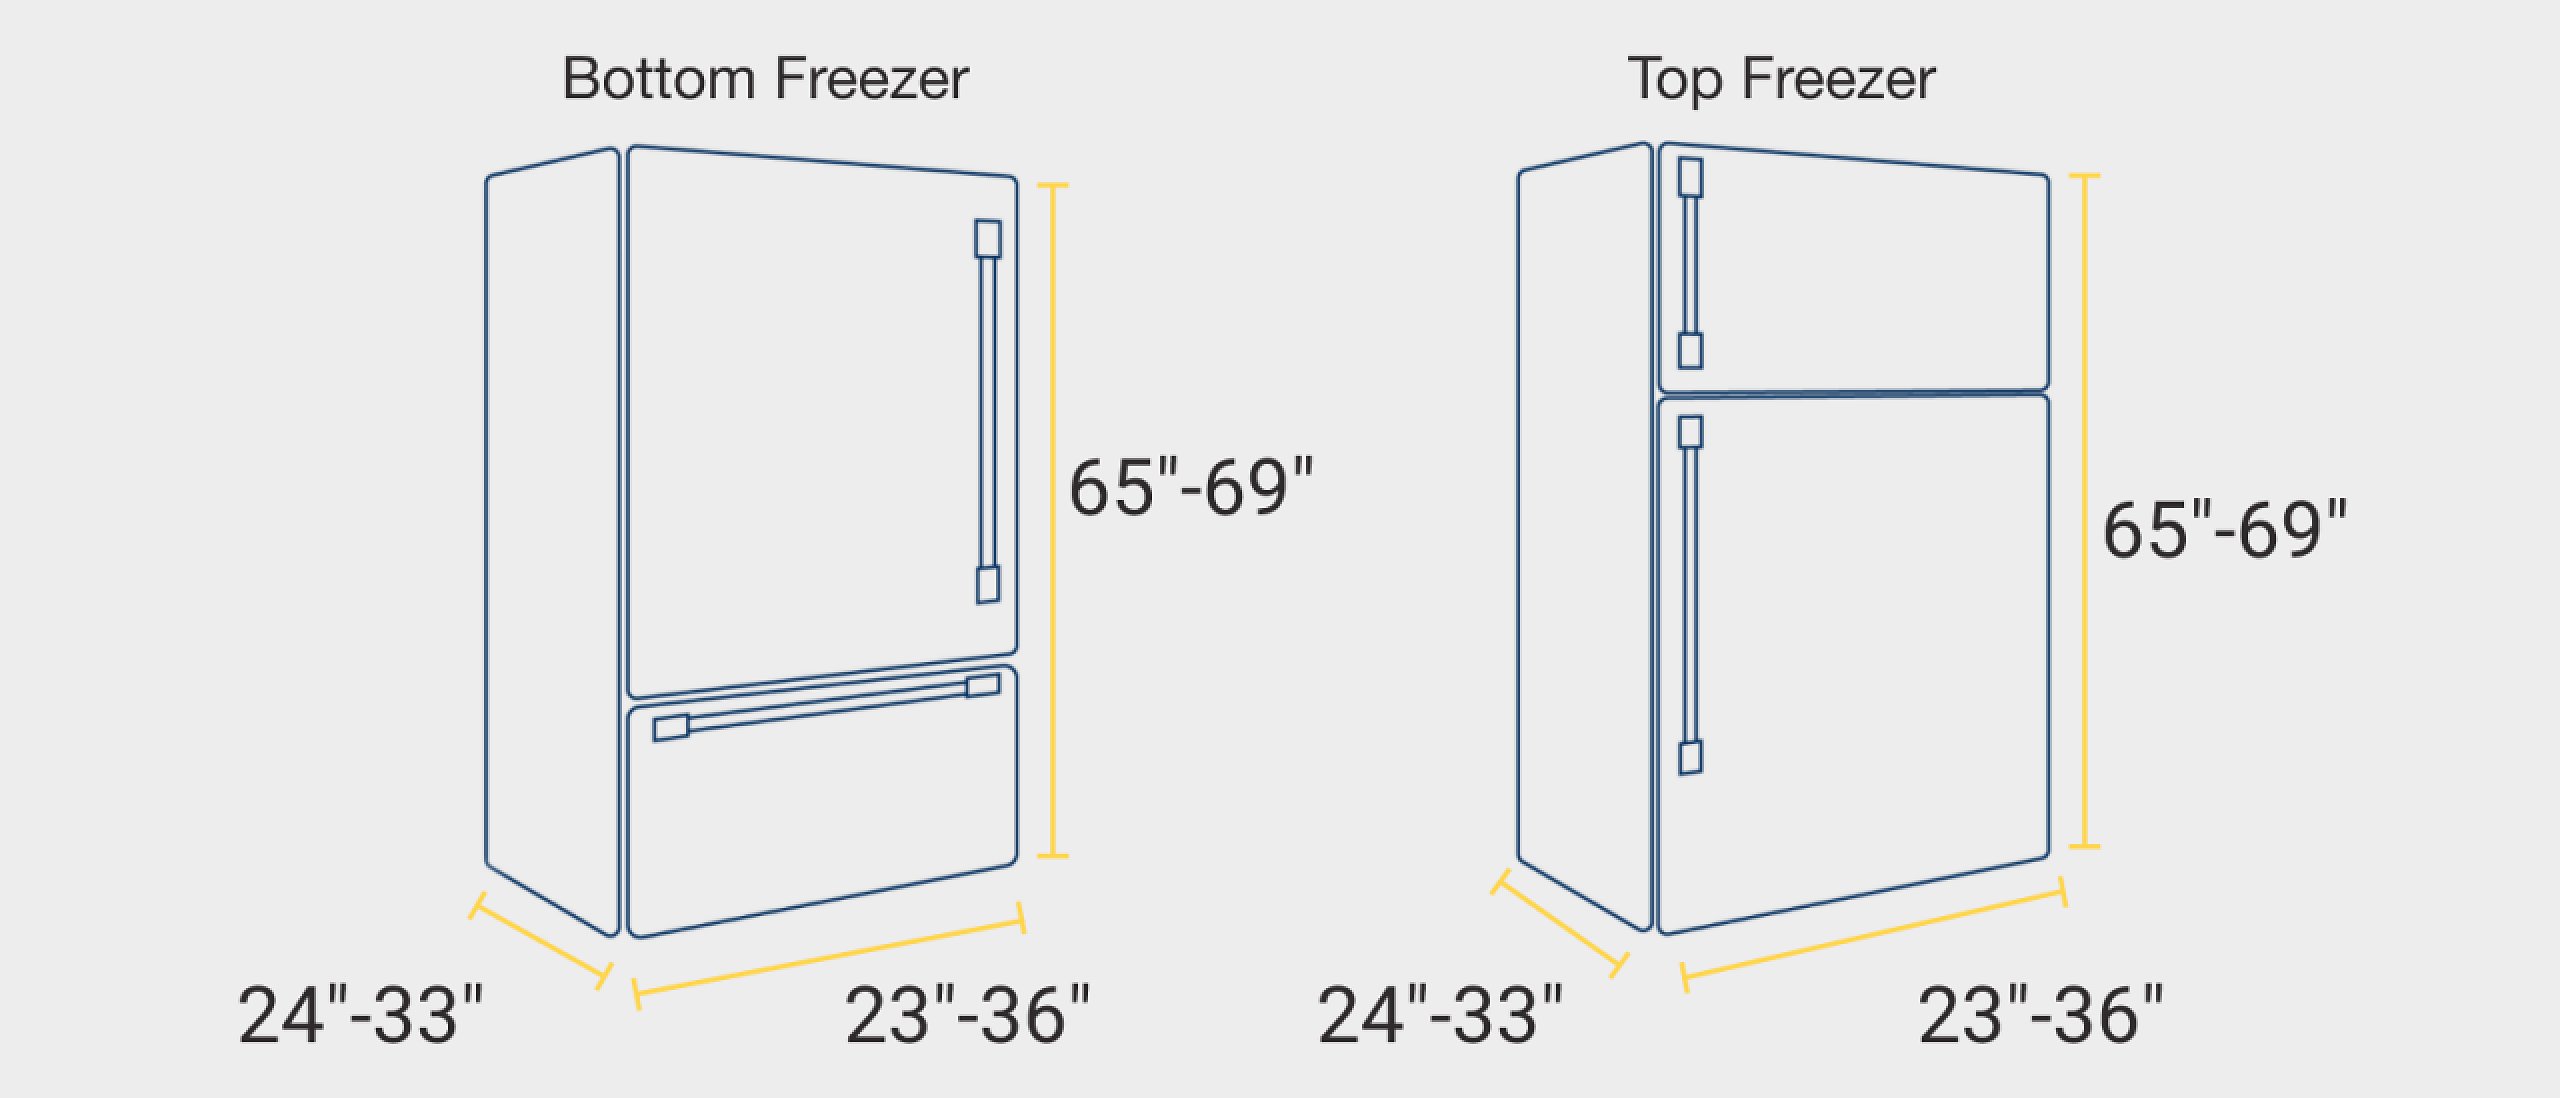 Guide To Refrigerator Sizes Dimensions Styles1 ?fmt=jpg&qlt=85,0&resMode=sharp2&op Usm=1.75,0.3,2,0&scl=1&constrain=fit,1